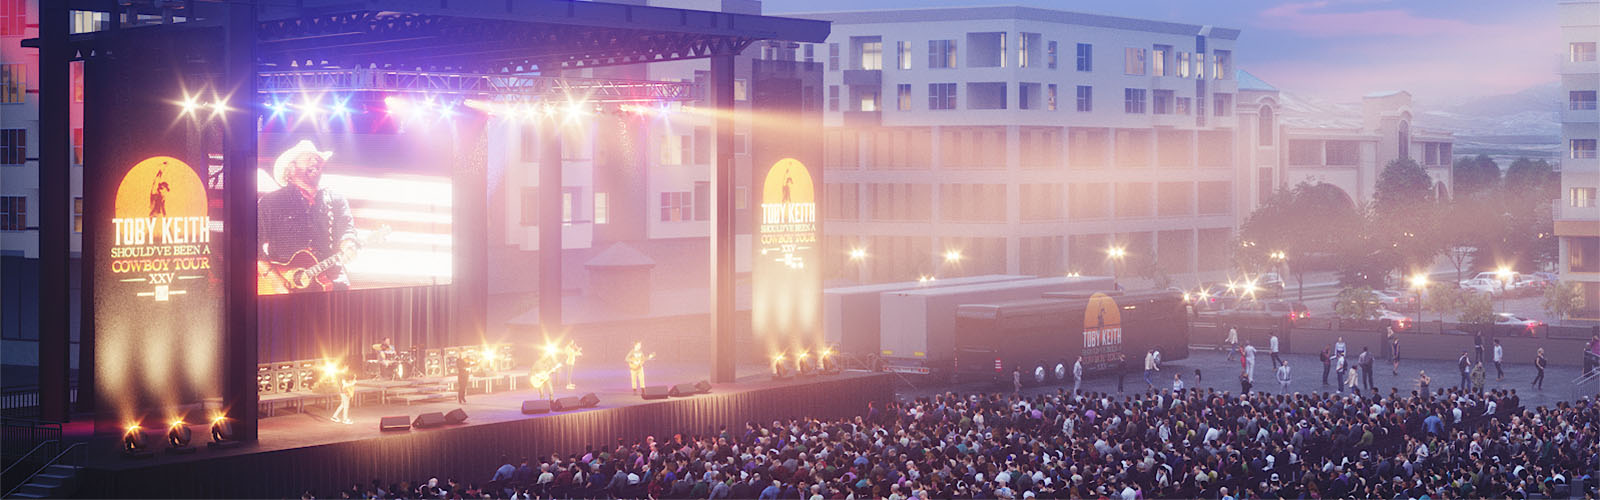 Nugget Event Center side stage rendering